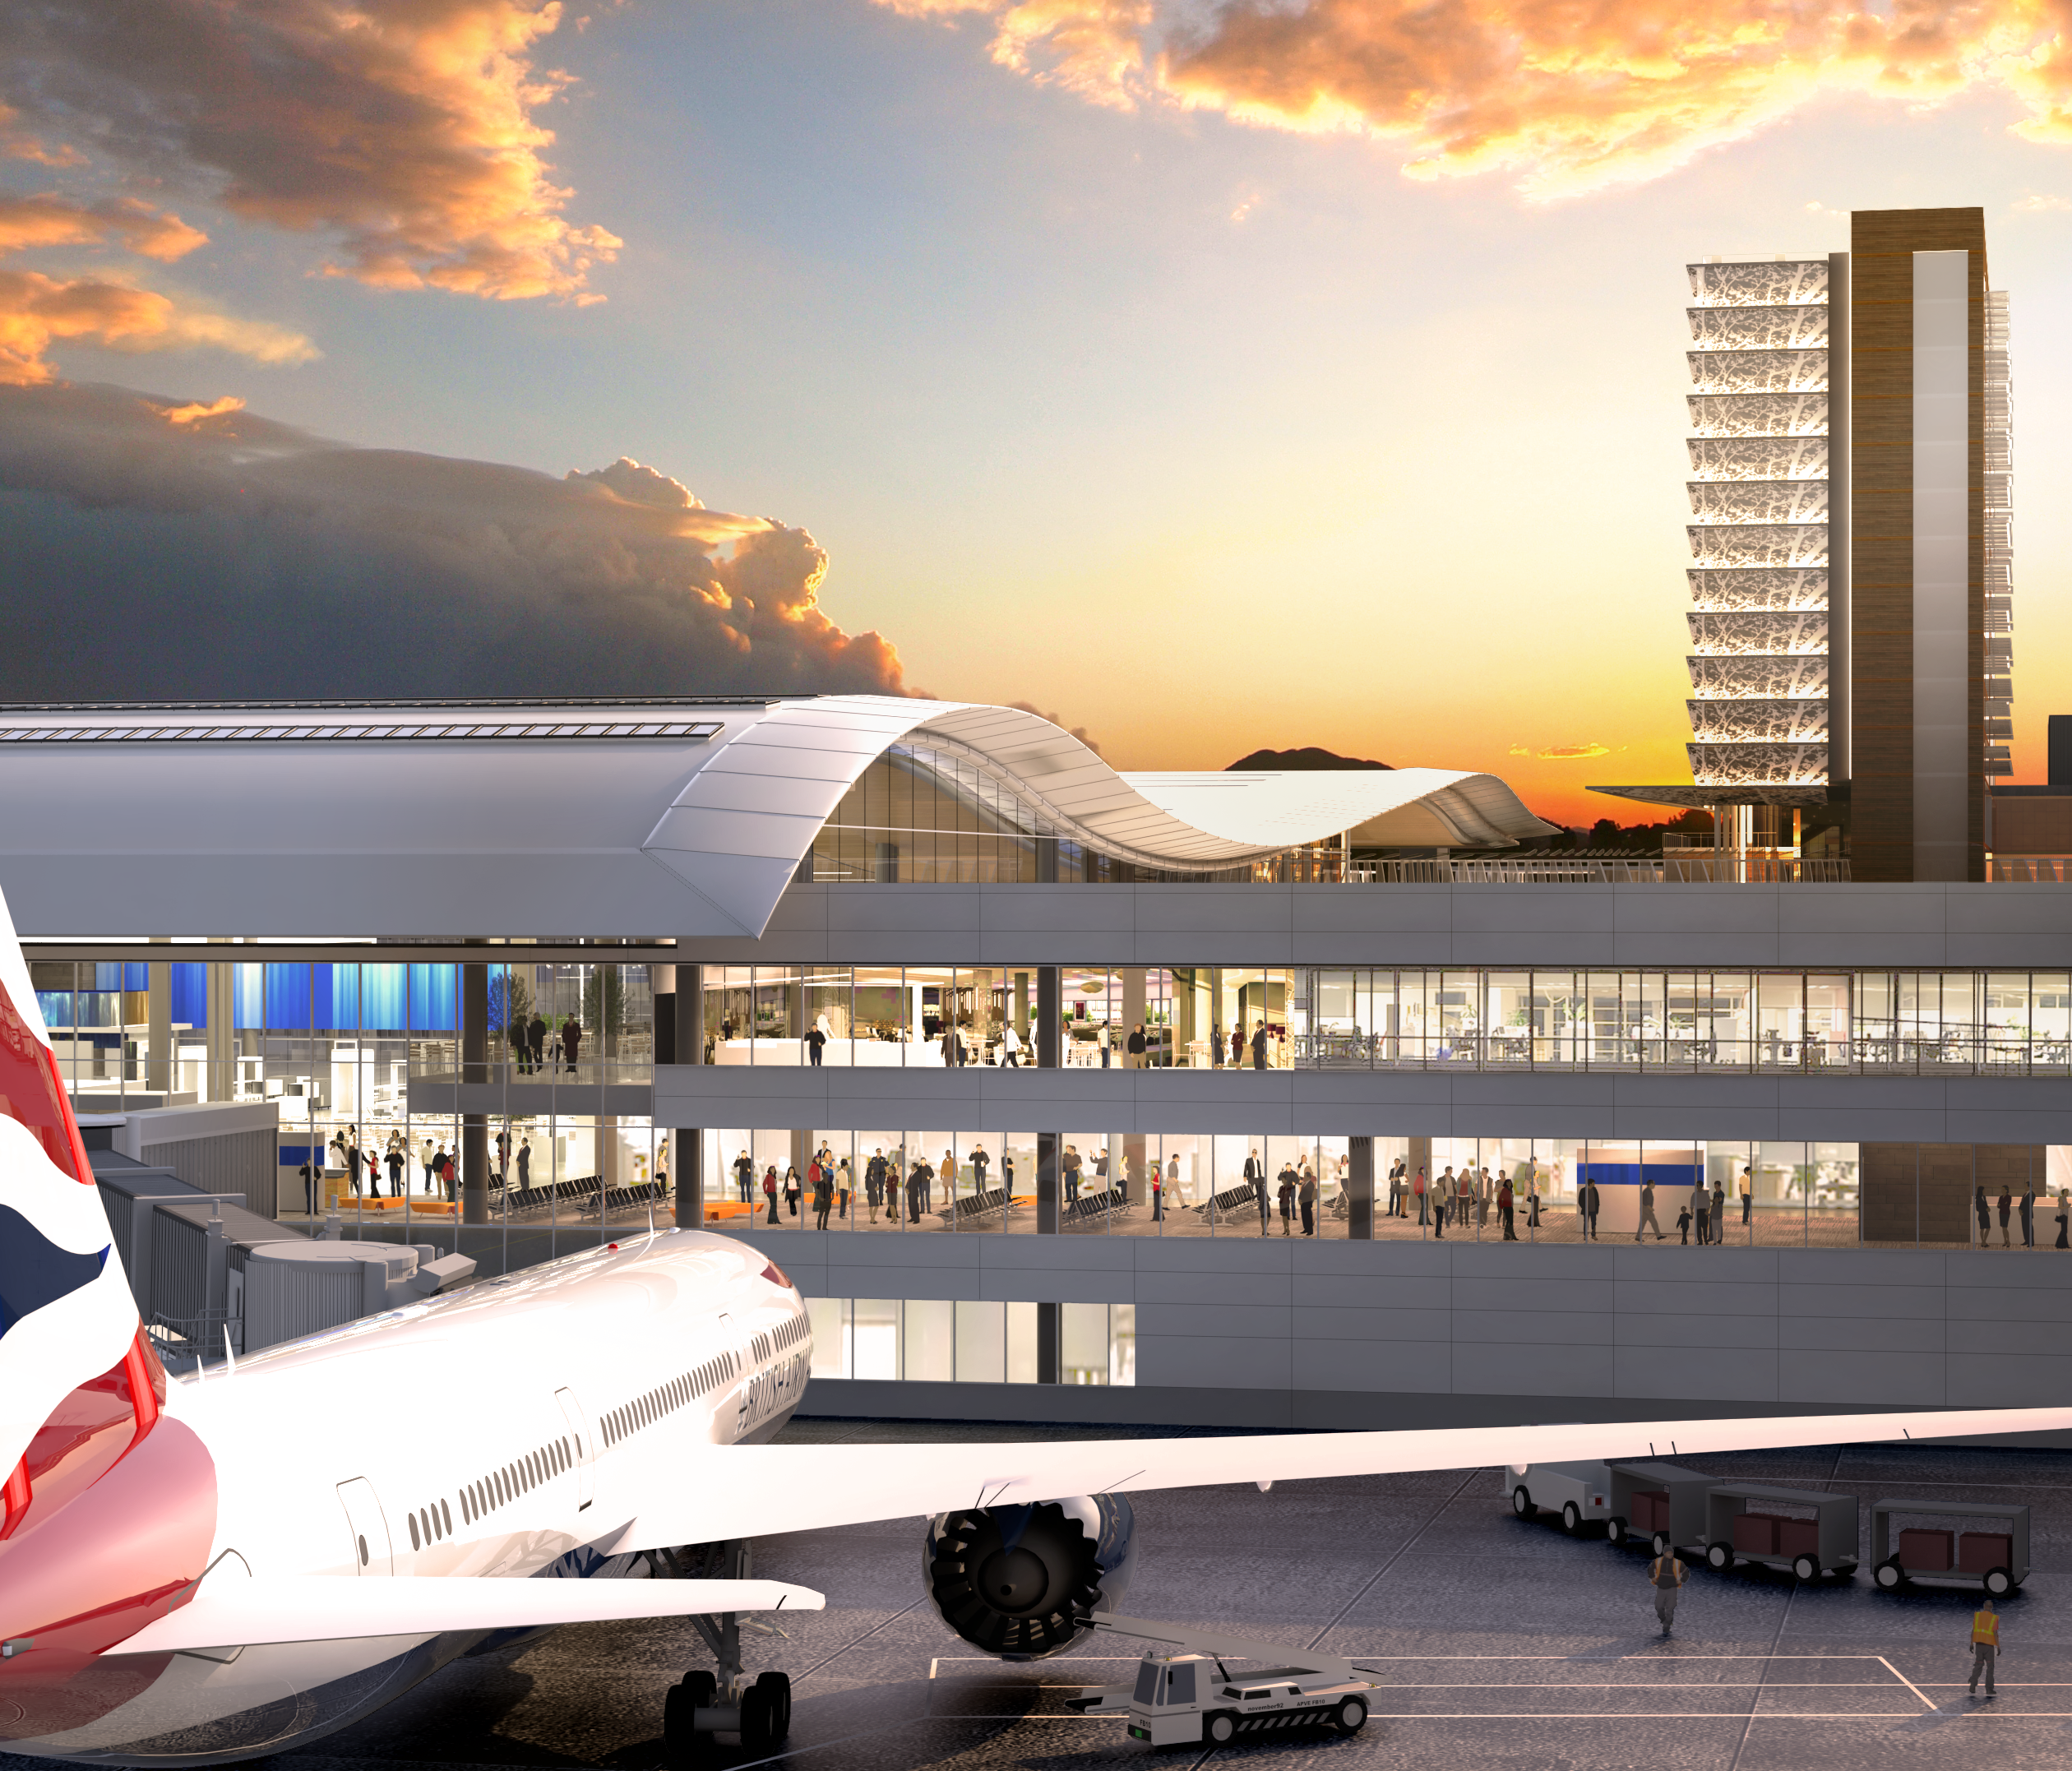 A rendering showing a renovated and expanded Nashville International Airport.